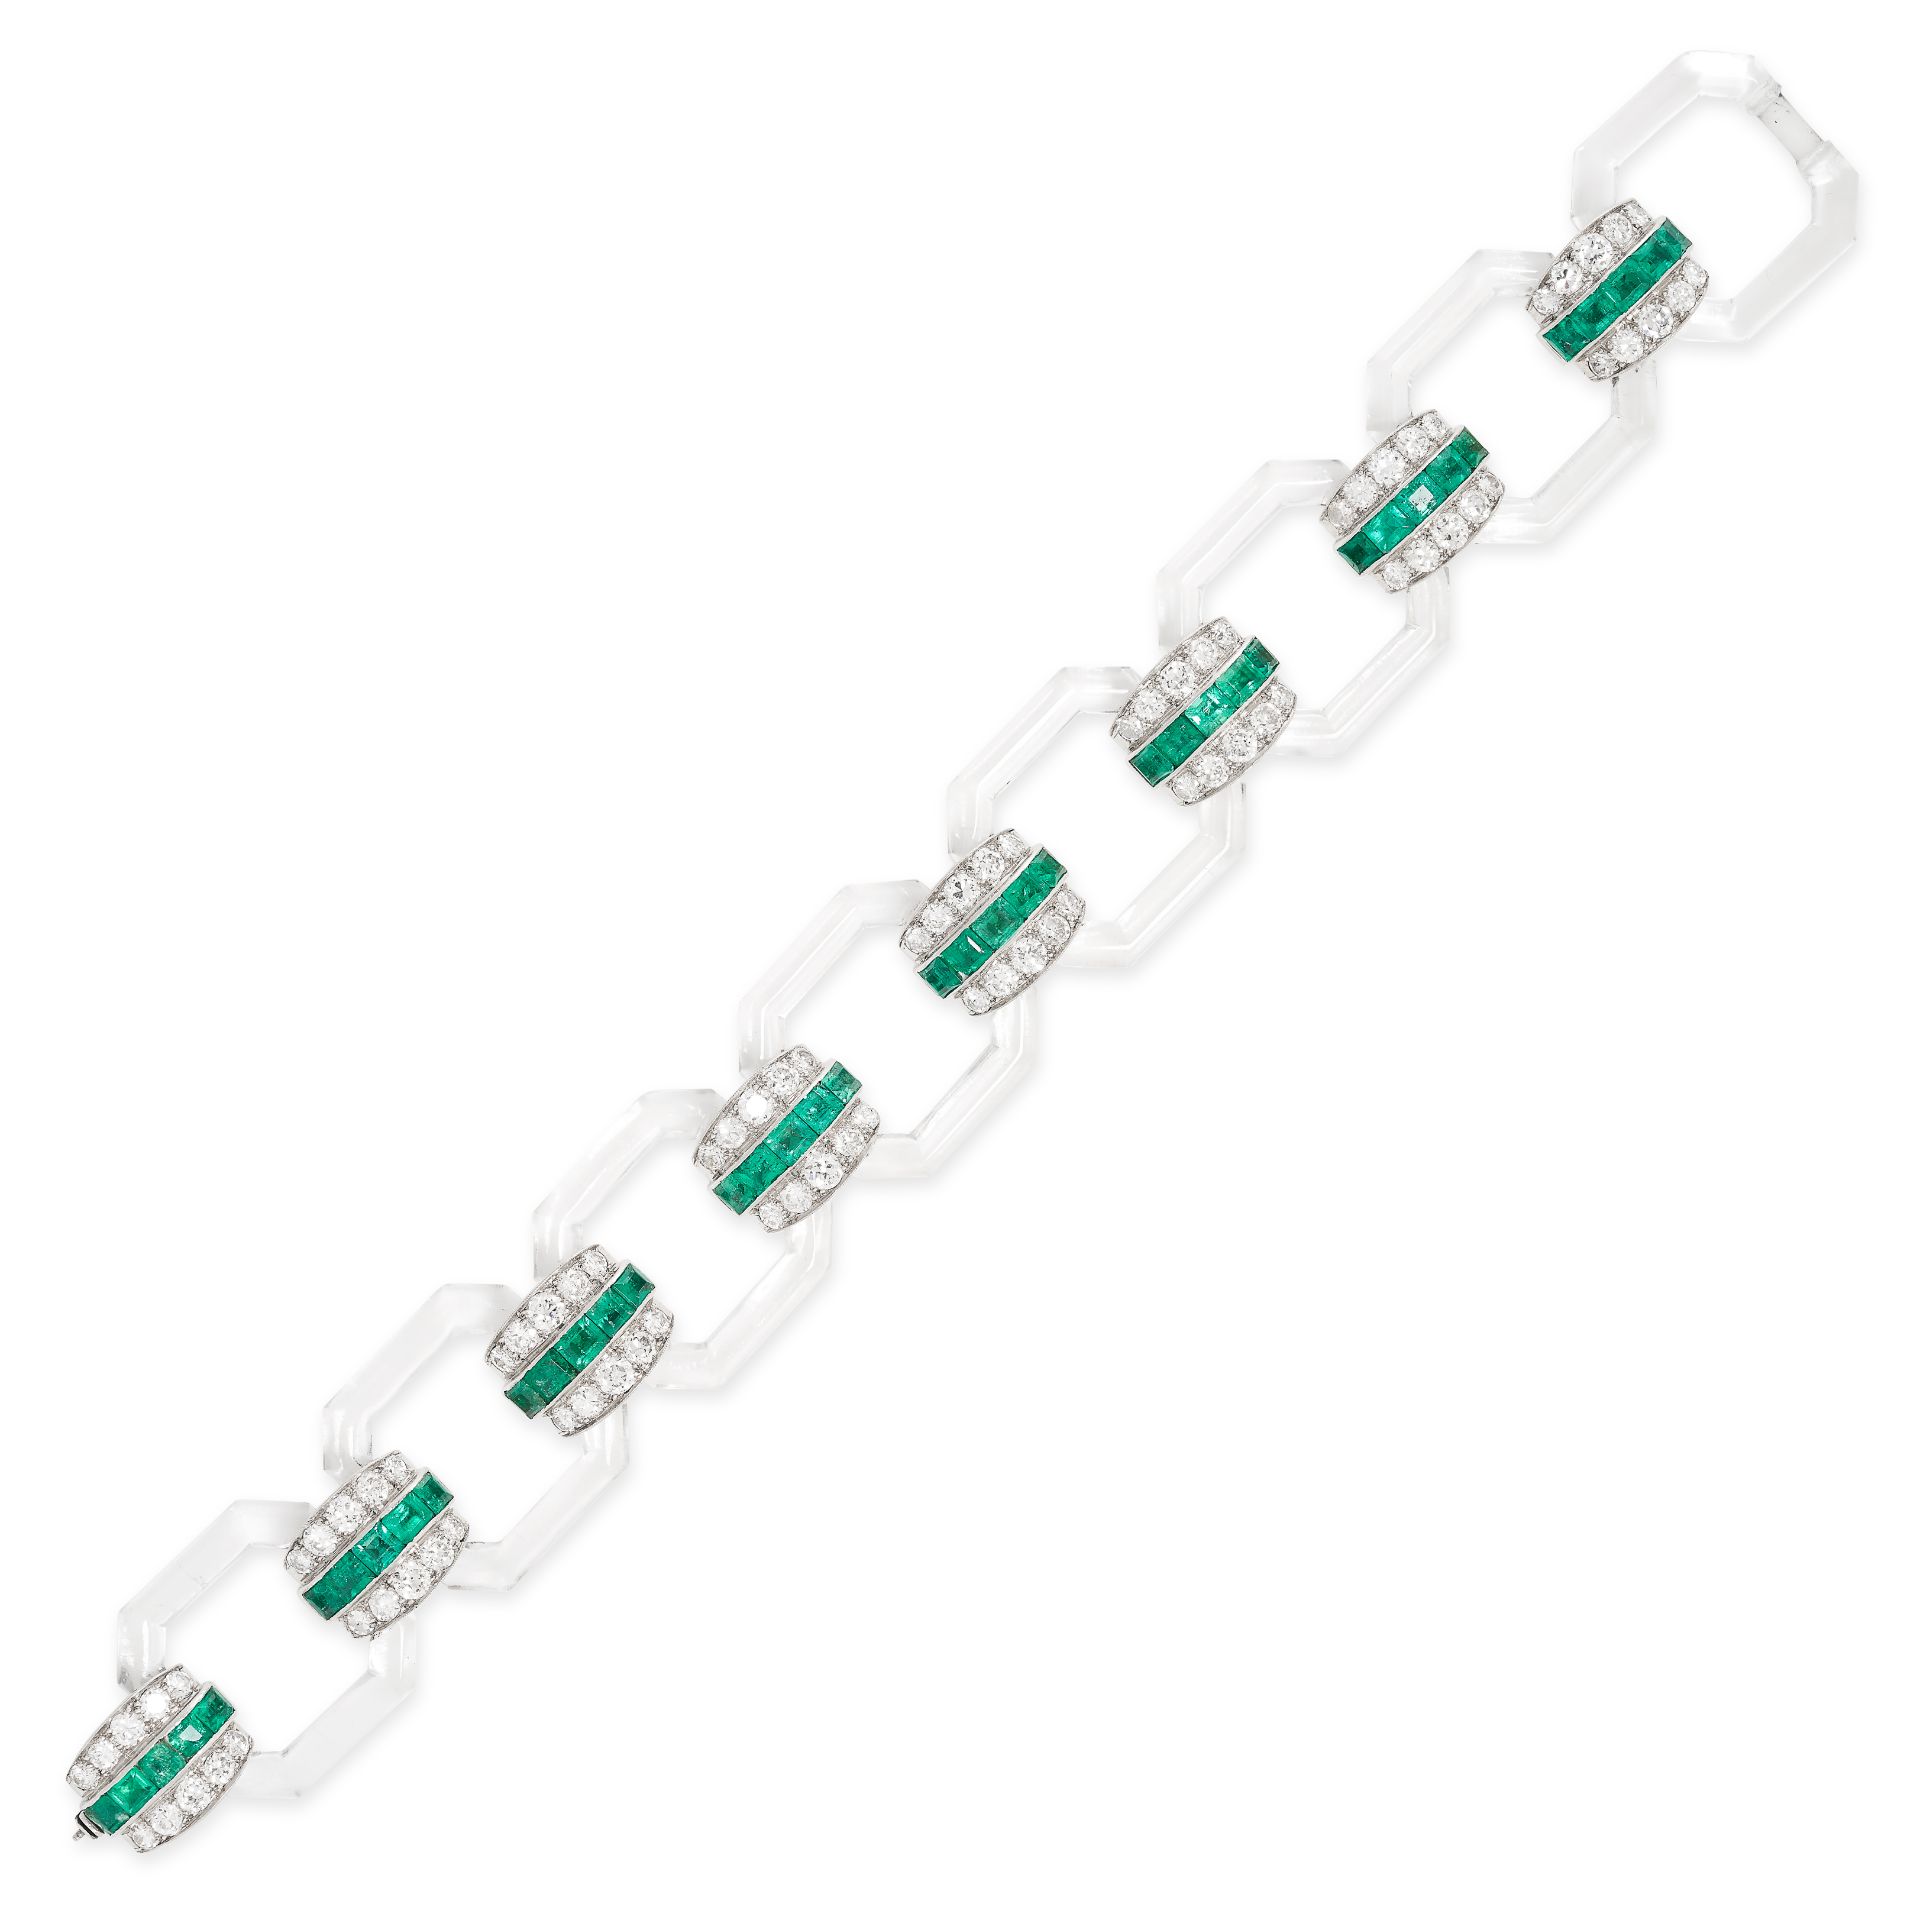 HENNEL, AN IMPORTANT ART DECO ROCK CRYSTAL, EMERALD AND DIAMOND BRACELET, 1929 comprising a row of